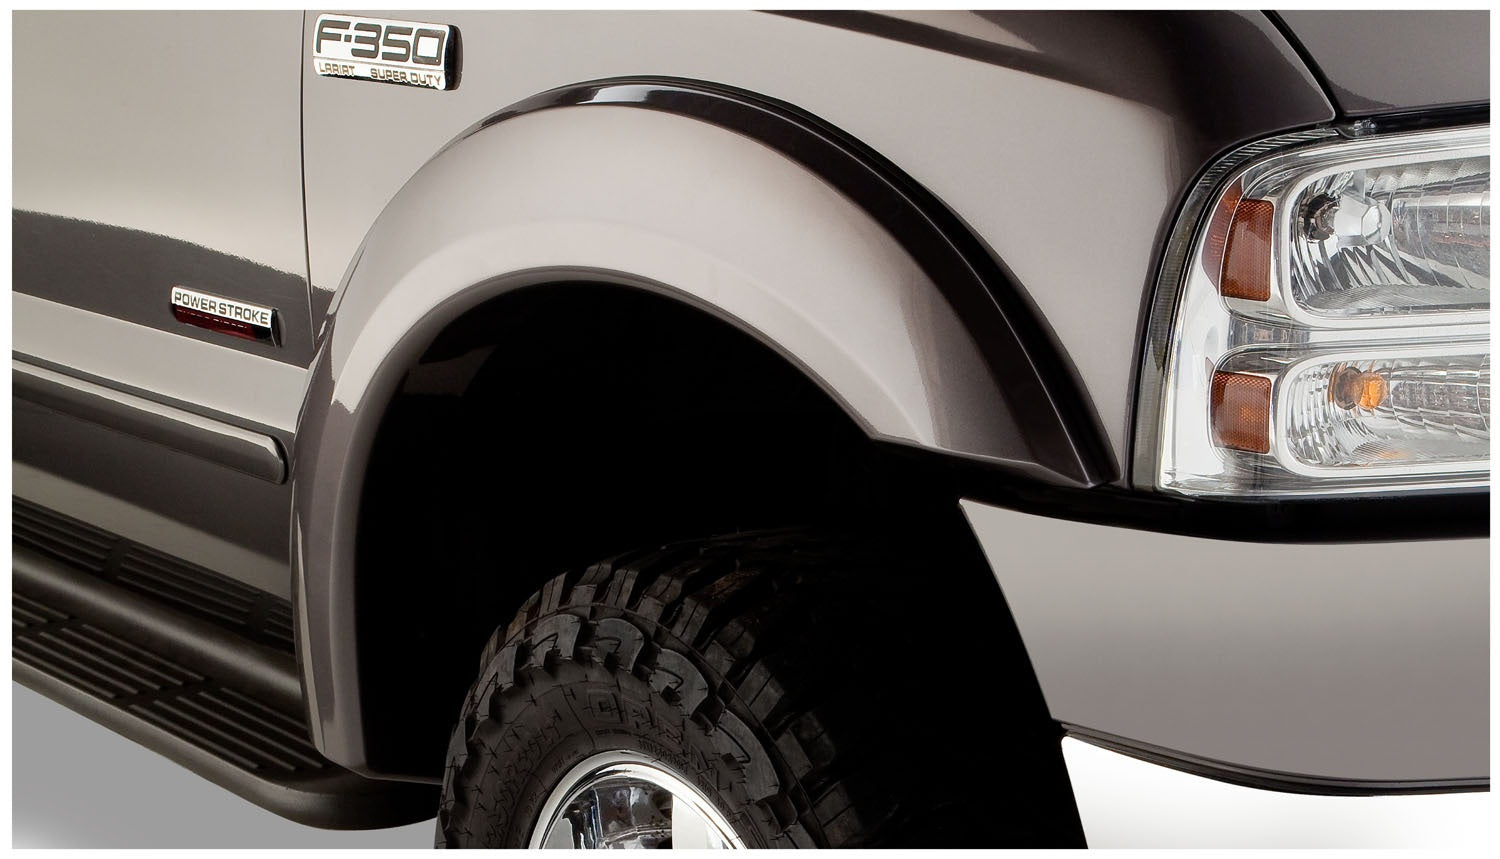 Bushwacker 20075-02 Black Extend-A-Fender Style Smooth Finish Front Fender Flares for 1999-2007 Ford F-250 to F-550 Super Duty